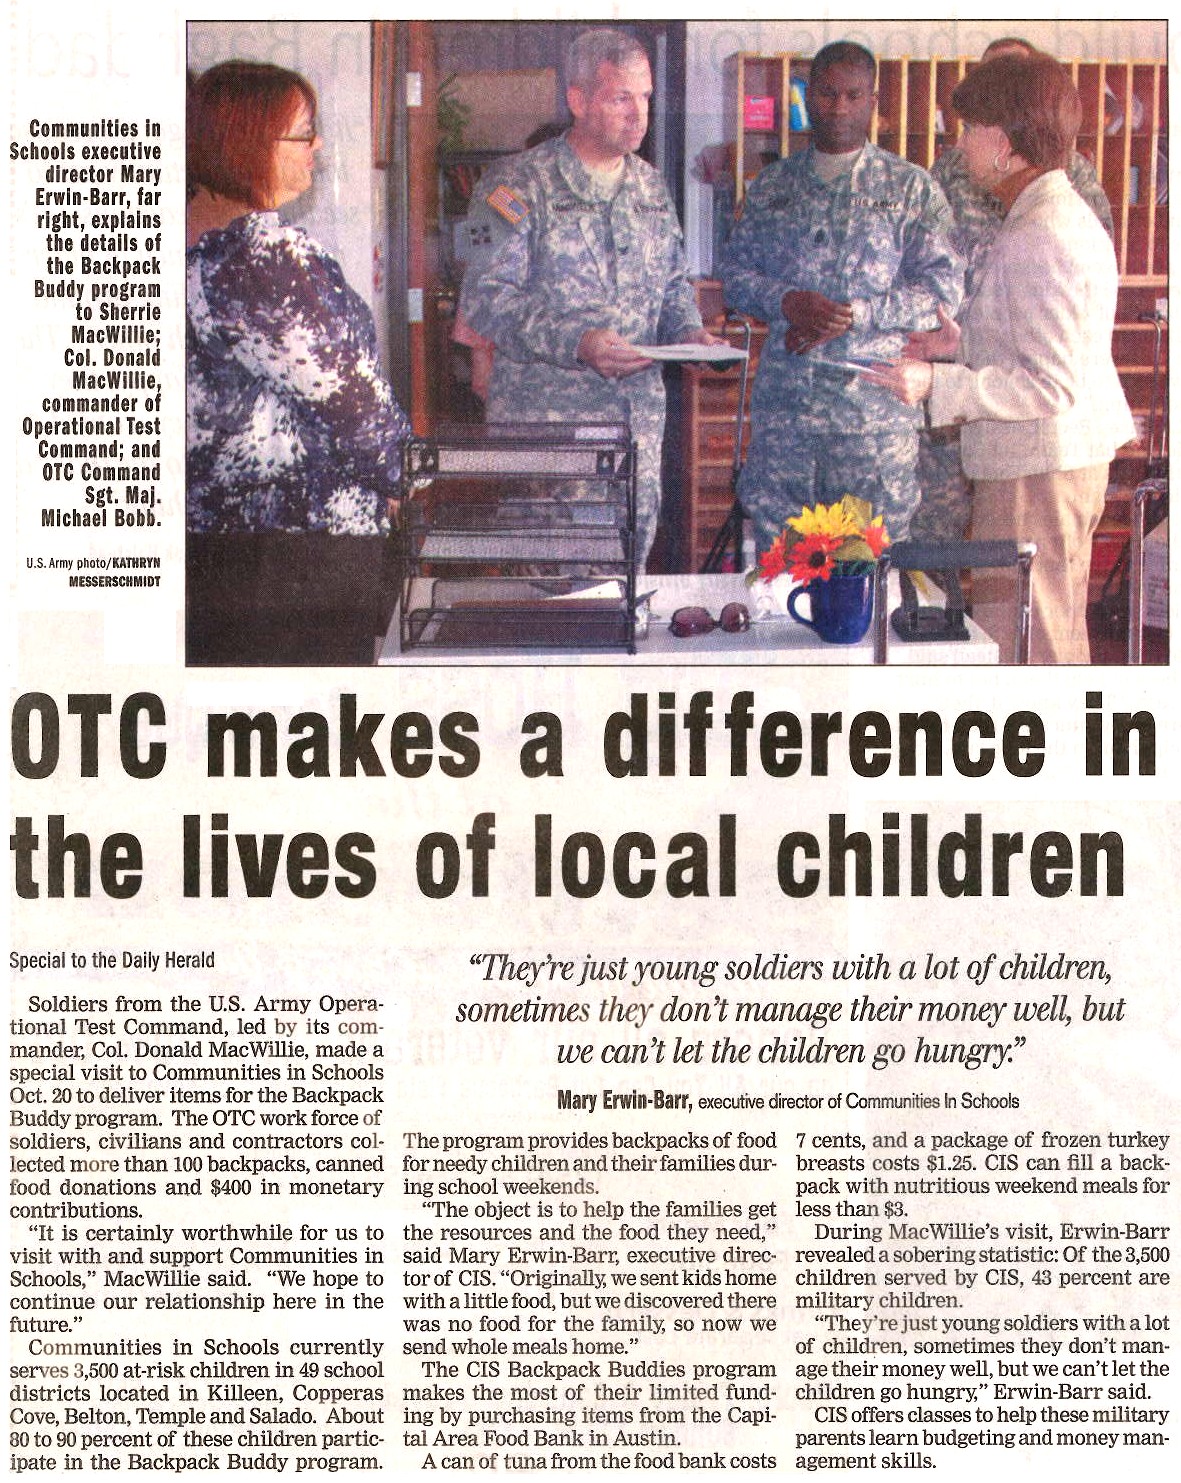 OTC makes a difference